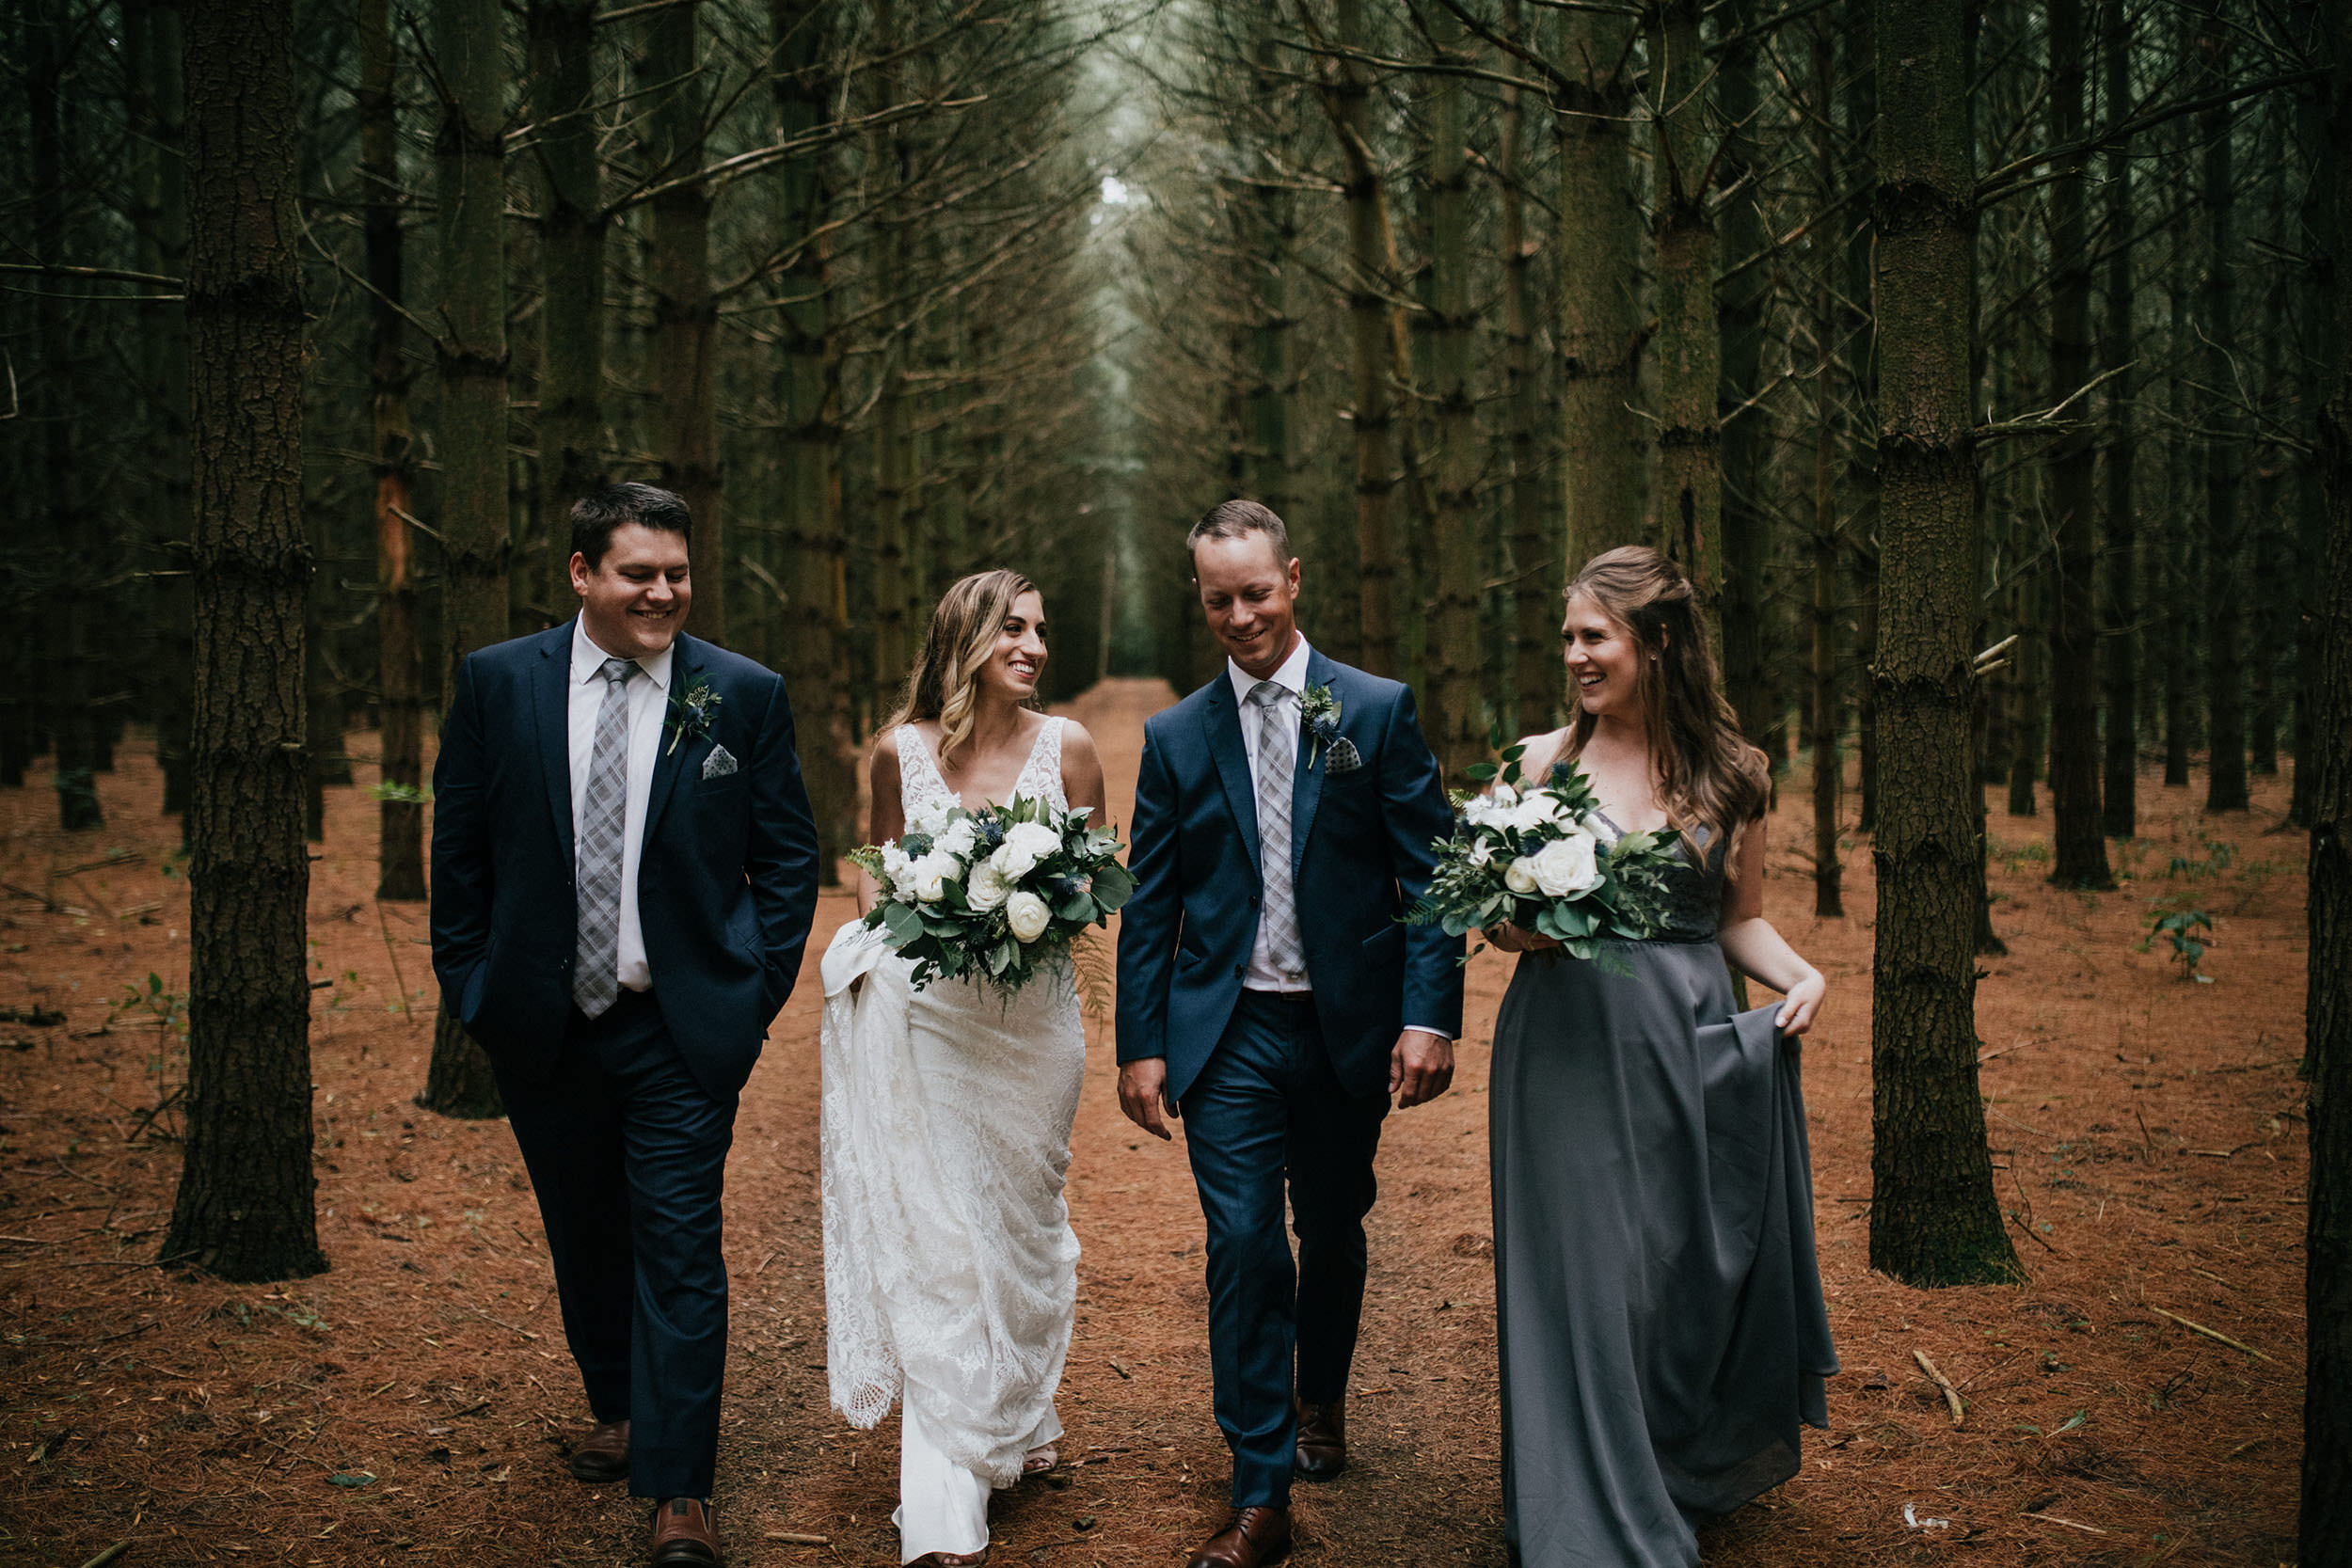 bridal party walking through wooded area